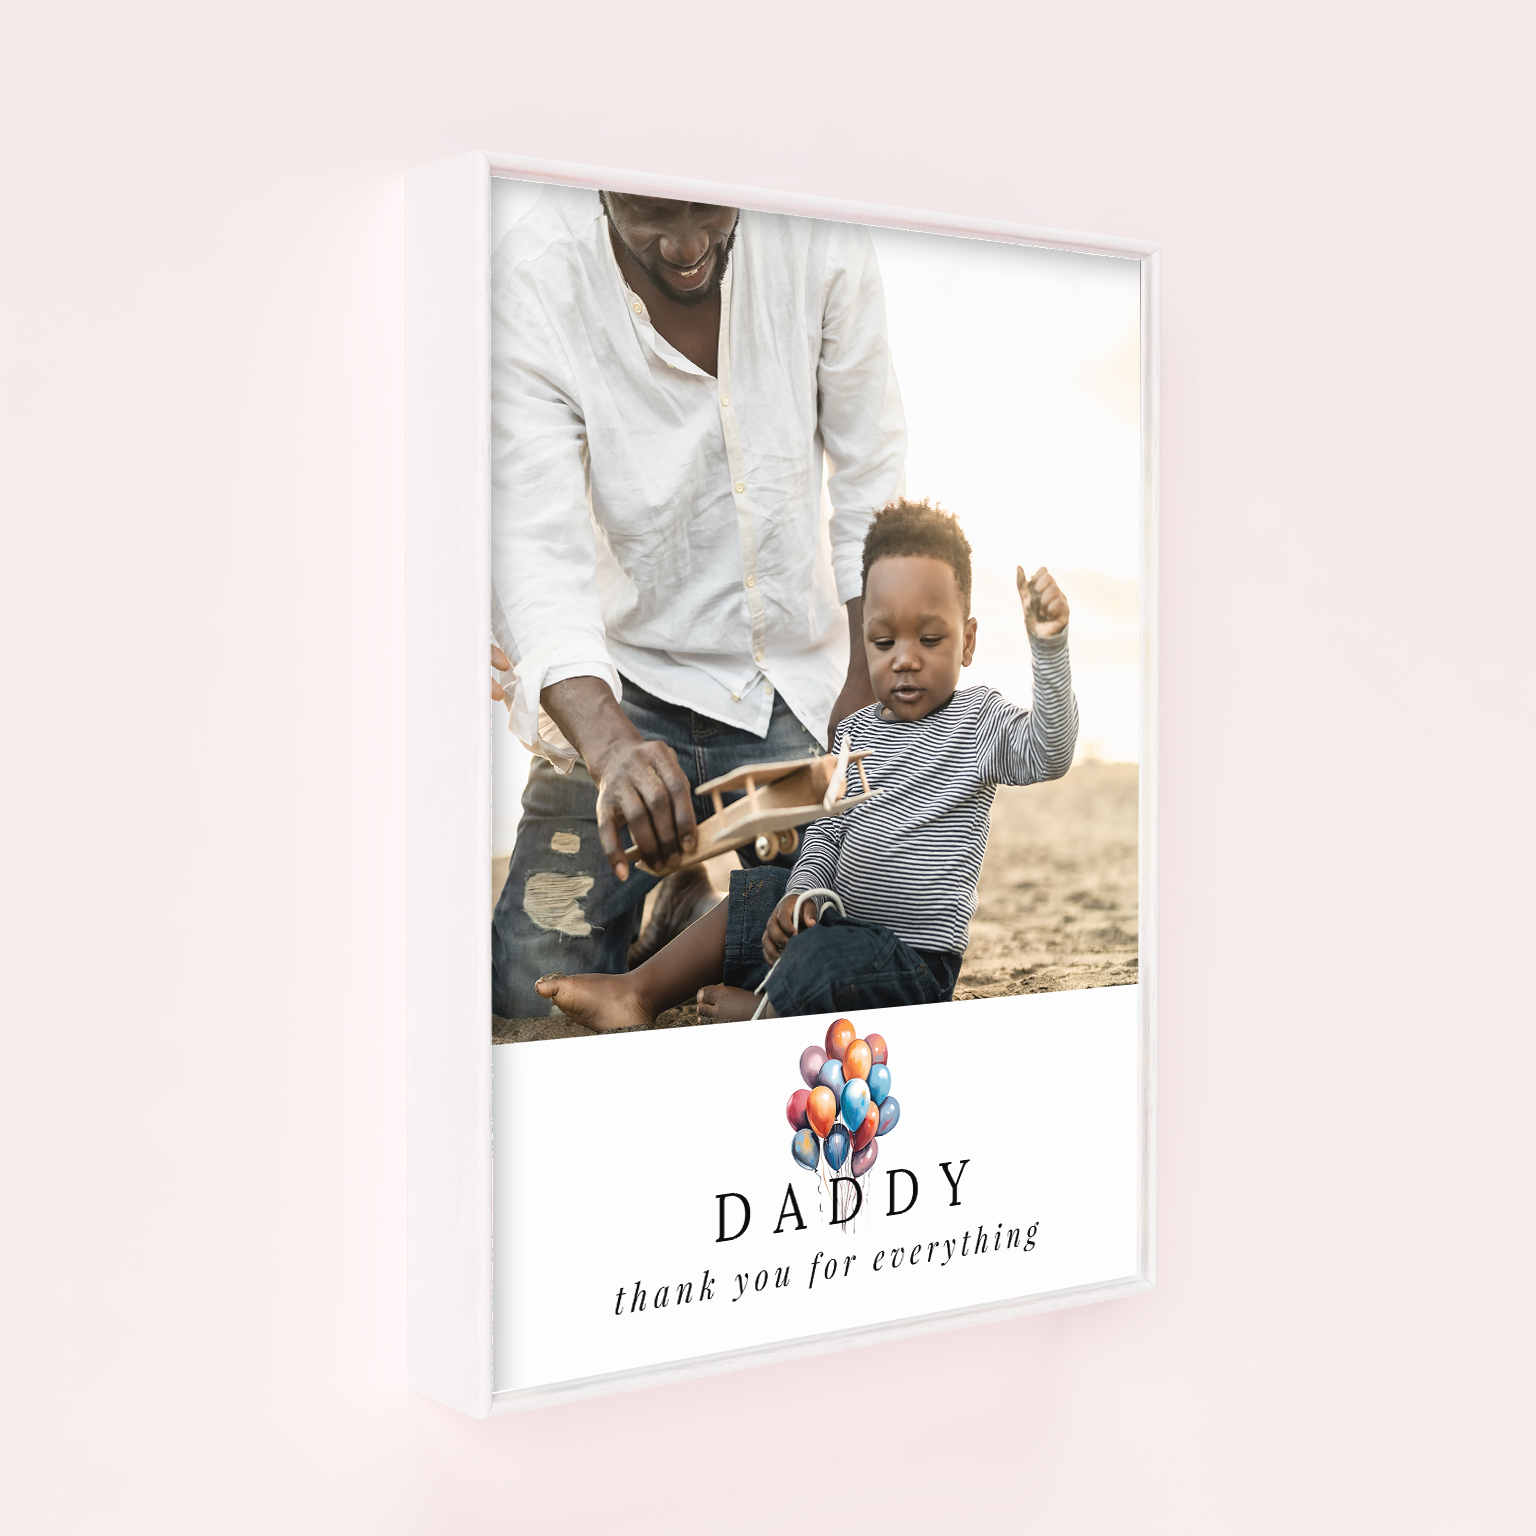 Balloons for Dad Framed Photo Canvas - Celebrate the Big Man with this portrait-oriented canvas showcasing one photo in premium 2cm thickness. The perfect gift to honor Dad on his special day, preserving cherished memories in a beautiful and enduring display.